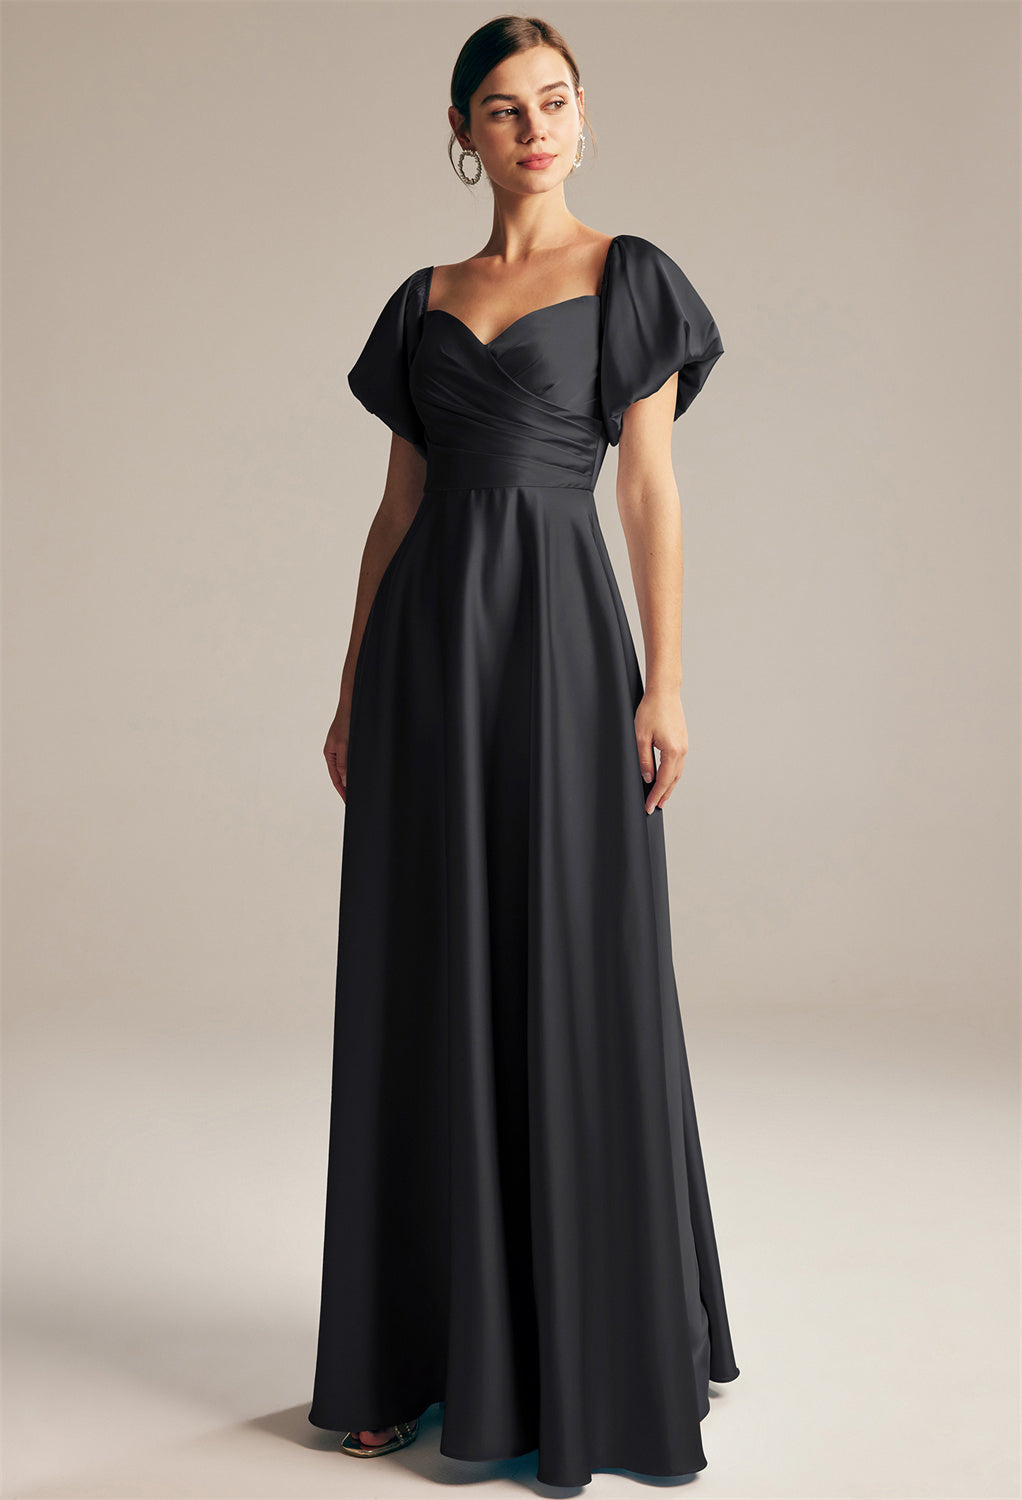 A Dey - Satin Charmeuse Bridesmaid Dress - Off The Rack with puff sleeves available at Bergamot Bridal.